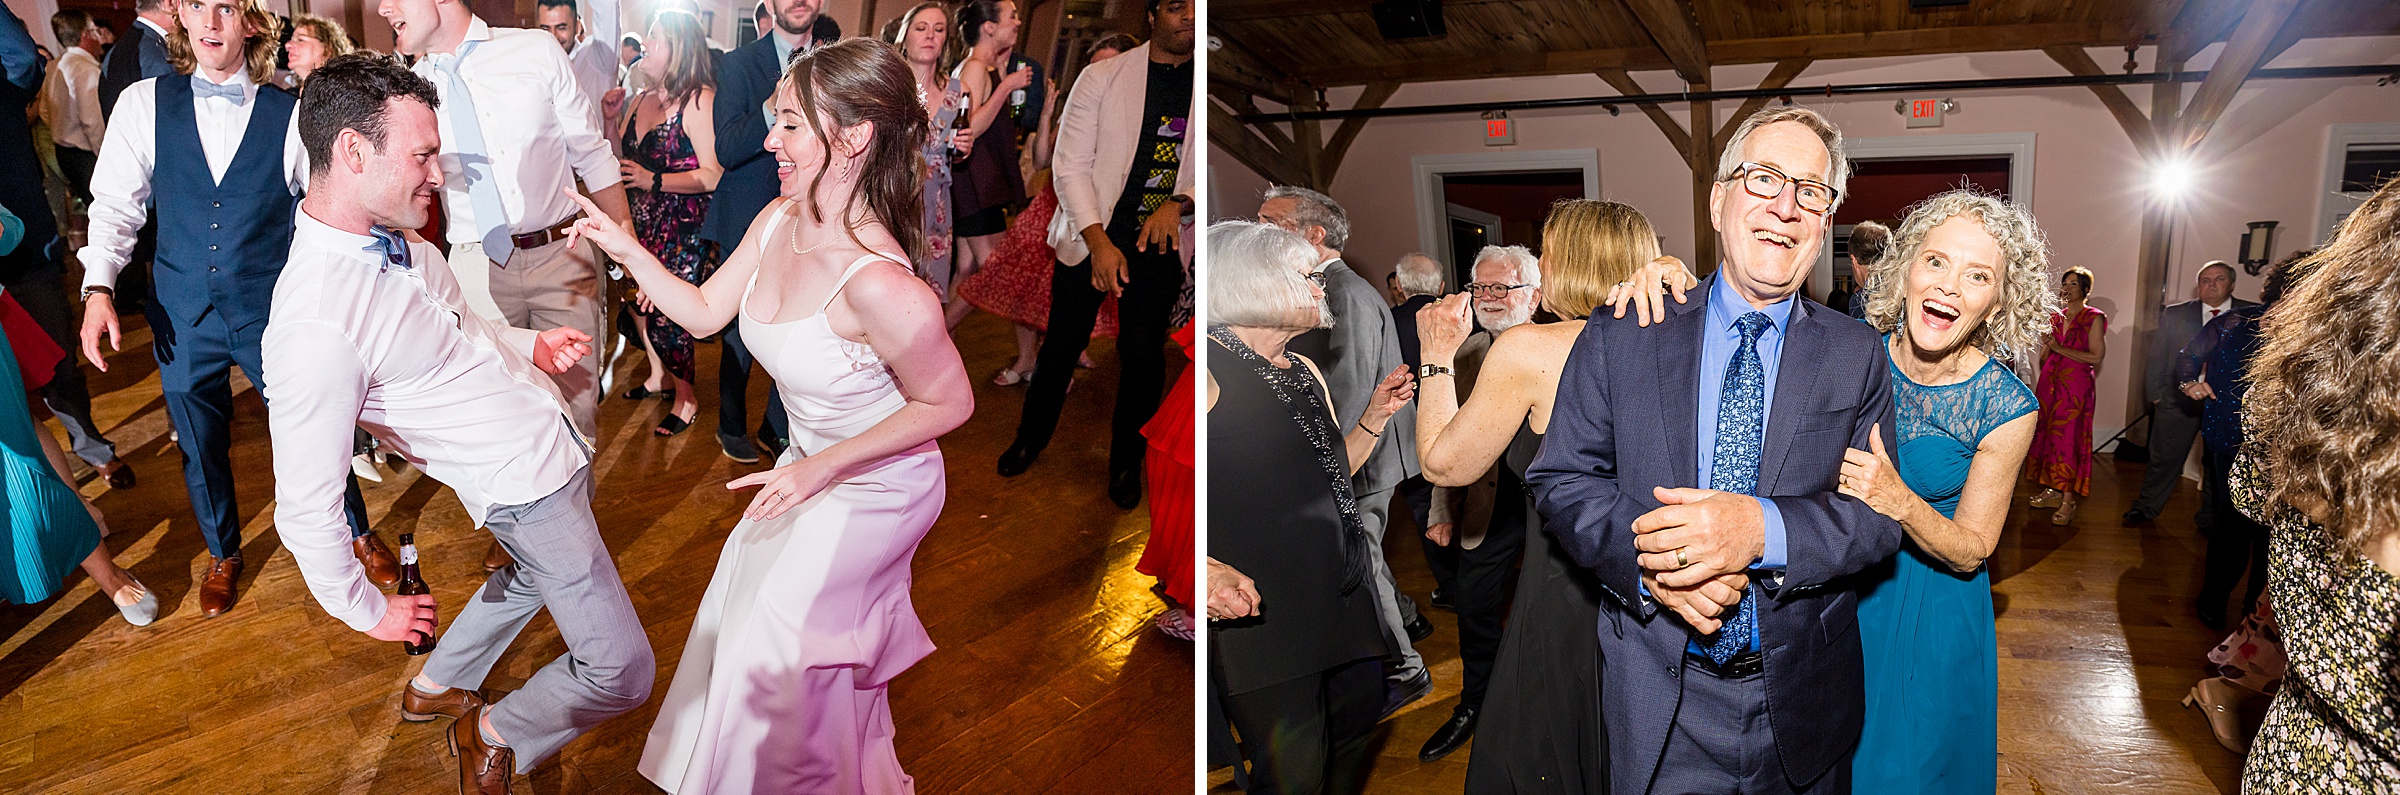 Two photos of people dancing at a celebration. On the left, a couple joyfully dances. On the right, an older couple poses, smiling with one person resting their arm on the other's shoulder.